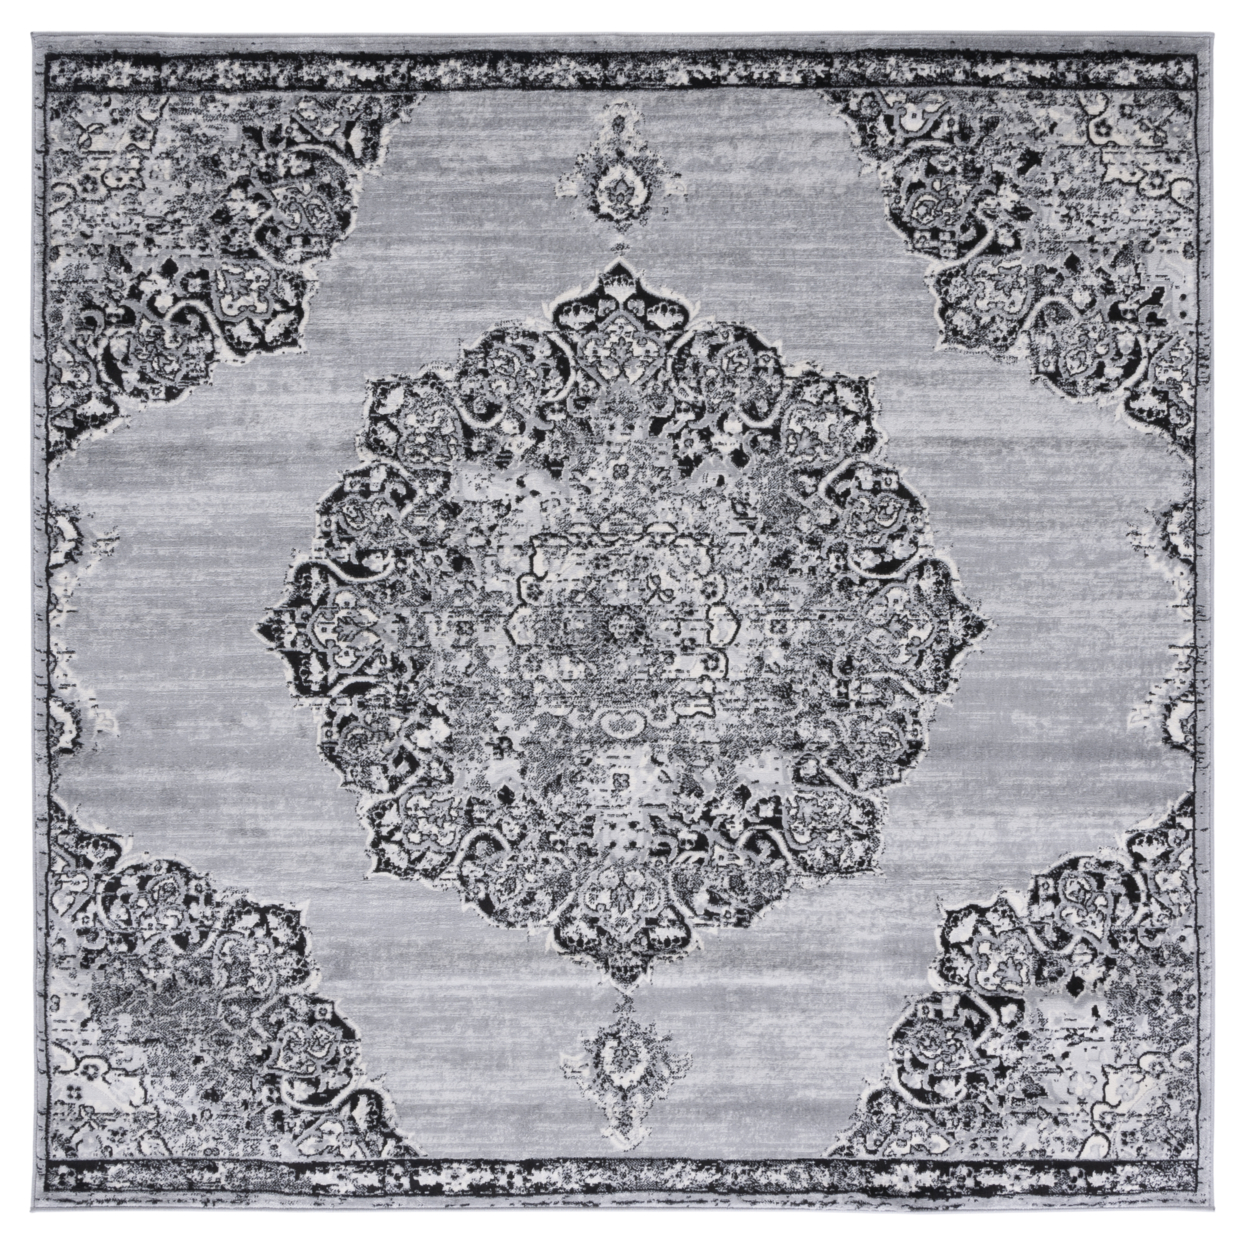 SAFAVIEH Brentwood Collection BNT802H Grey / Black Rug - 6' 7 Square